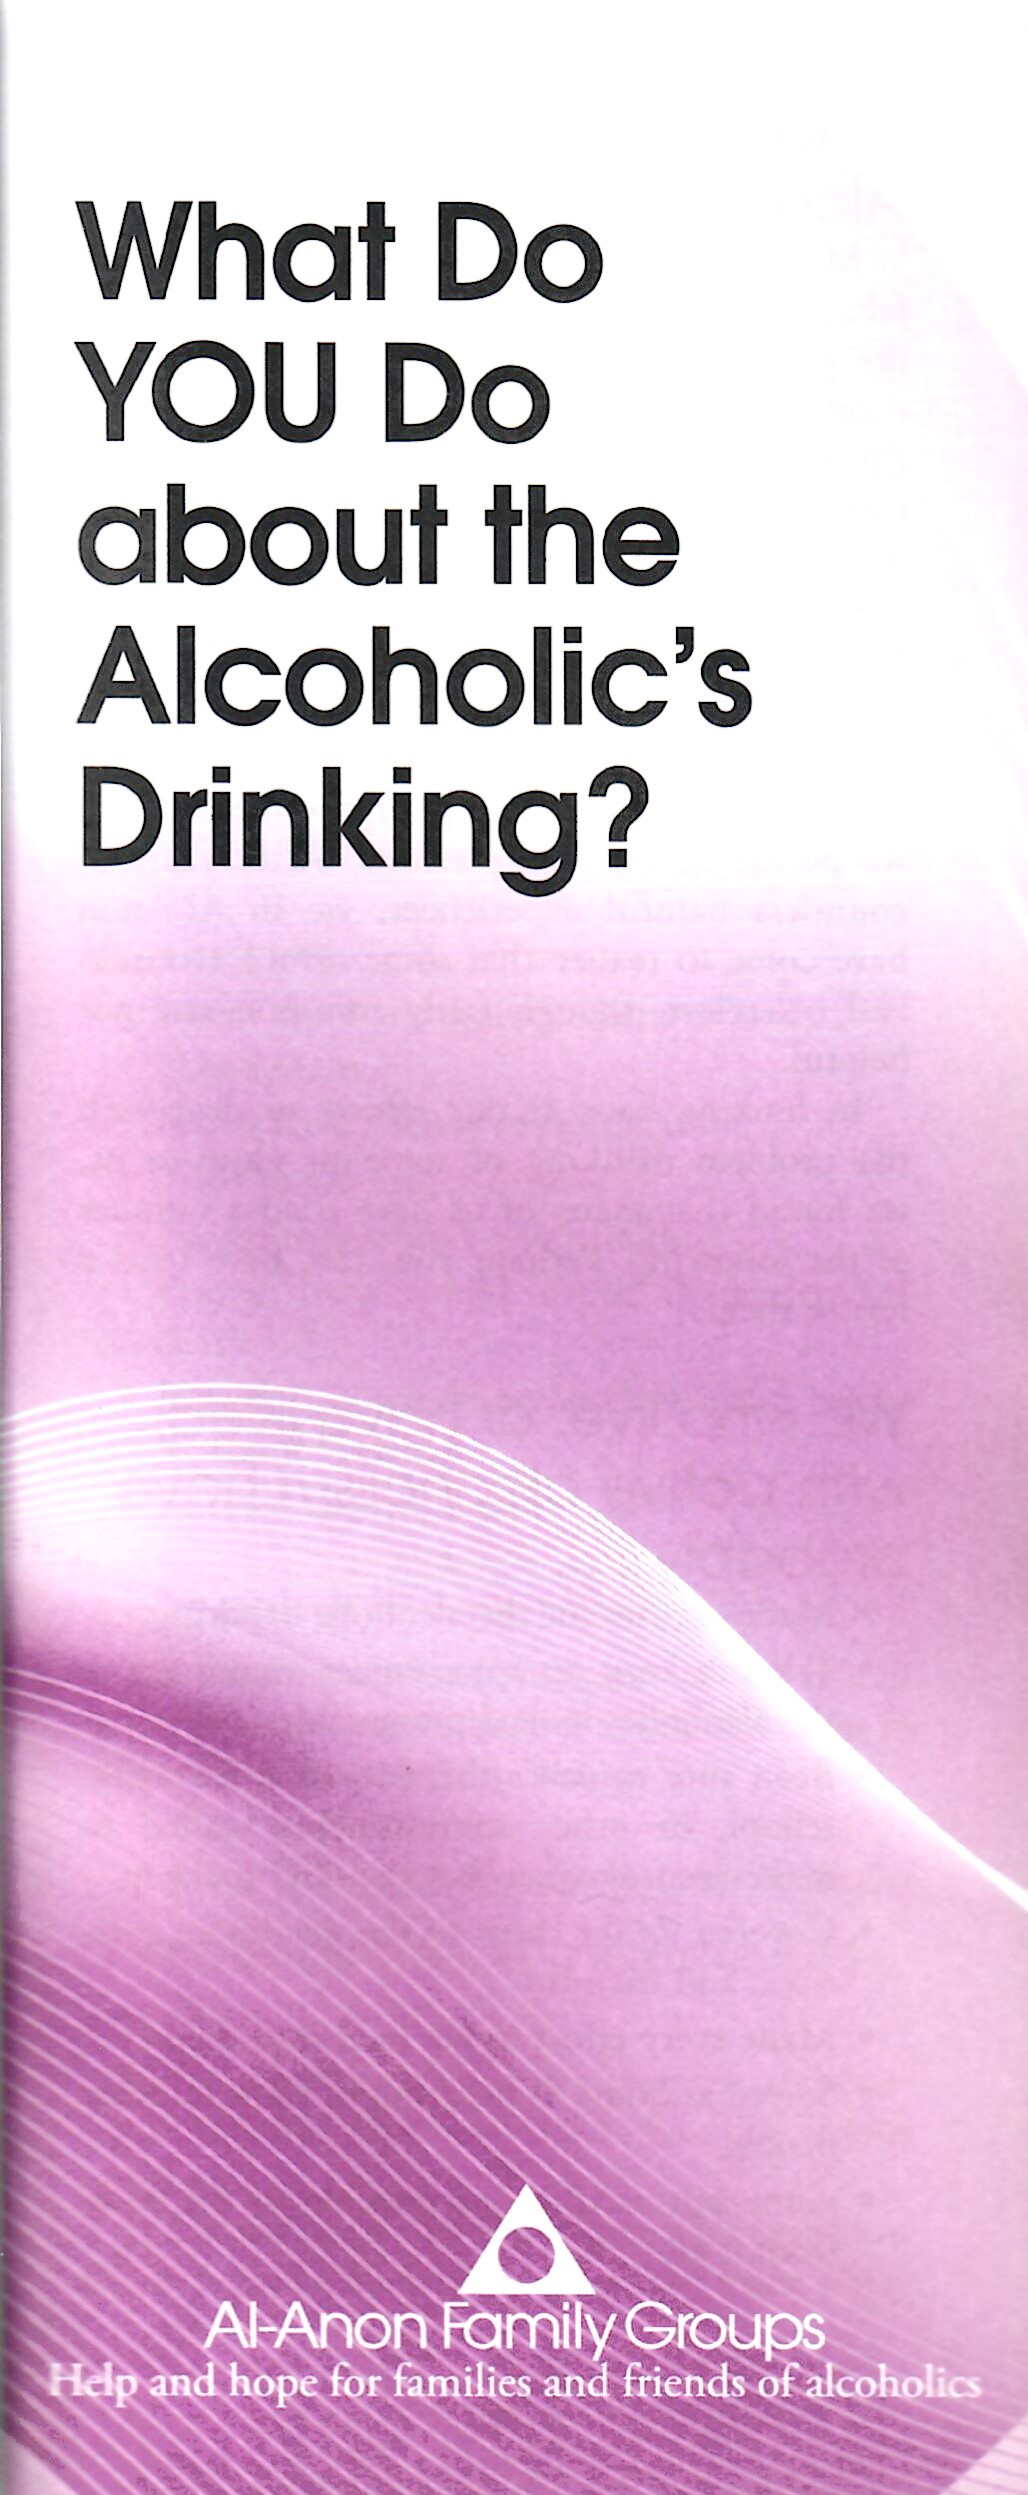 What Do You Do about the Alcoholic’s Drinking? P-19